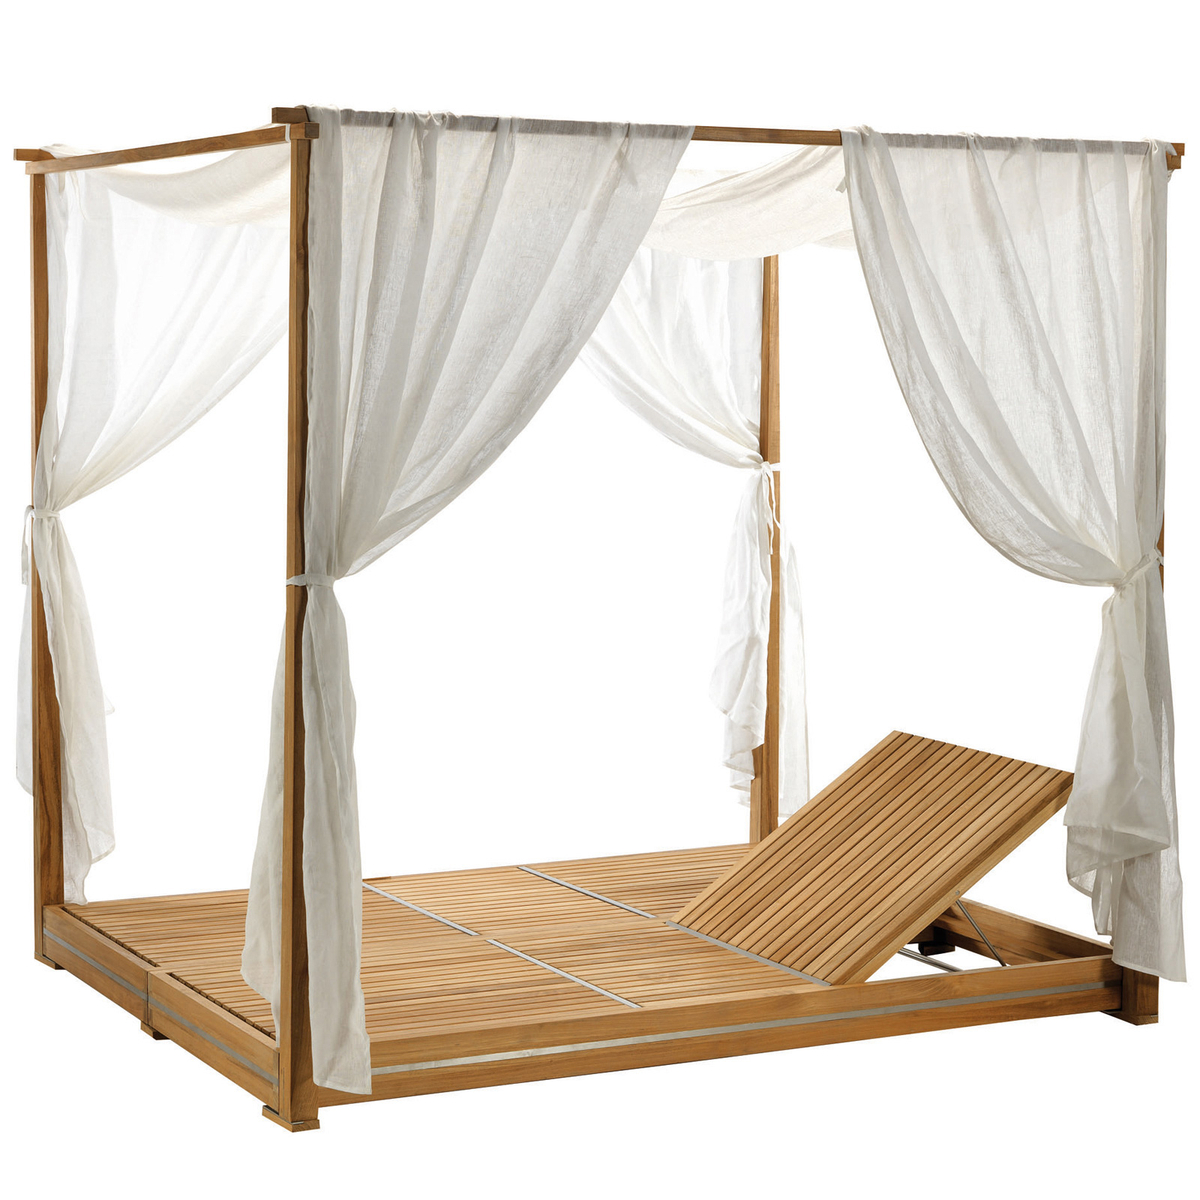 Essenza Outdoor Lounge Bed